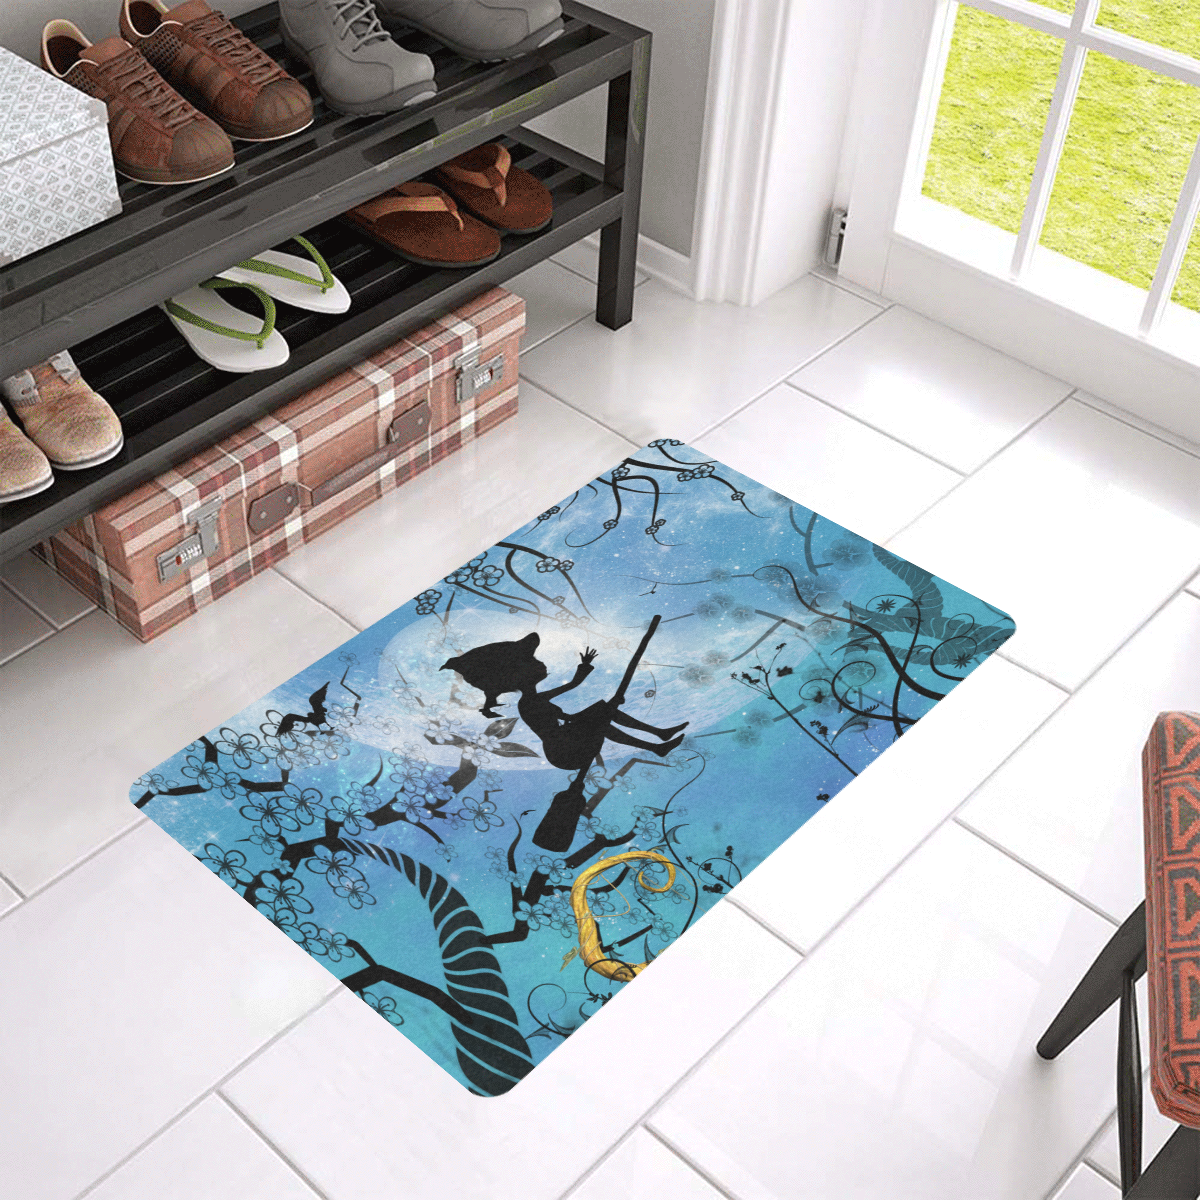 Cute flying witch Doormat 24"x16" (Black Base)